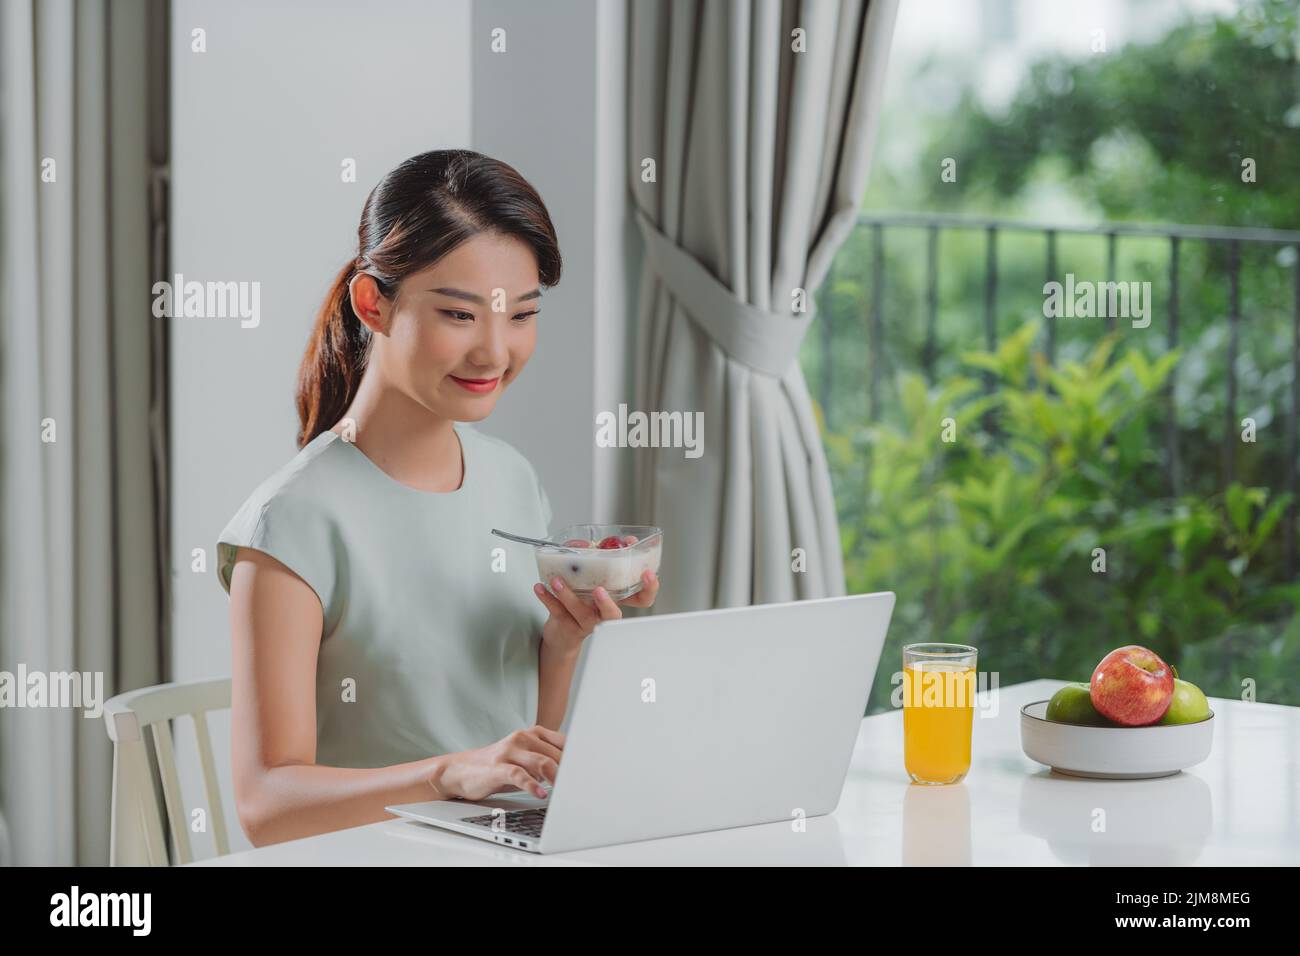 Portrait of beautiful young woman working with laptop while eating at home. Stock Photo